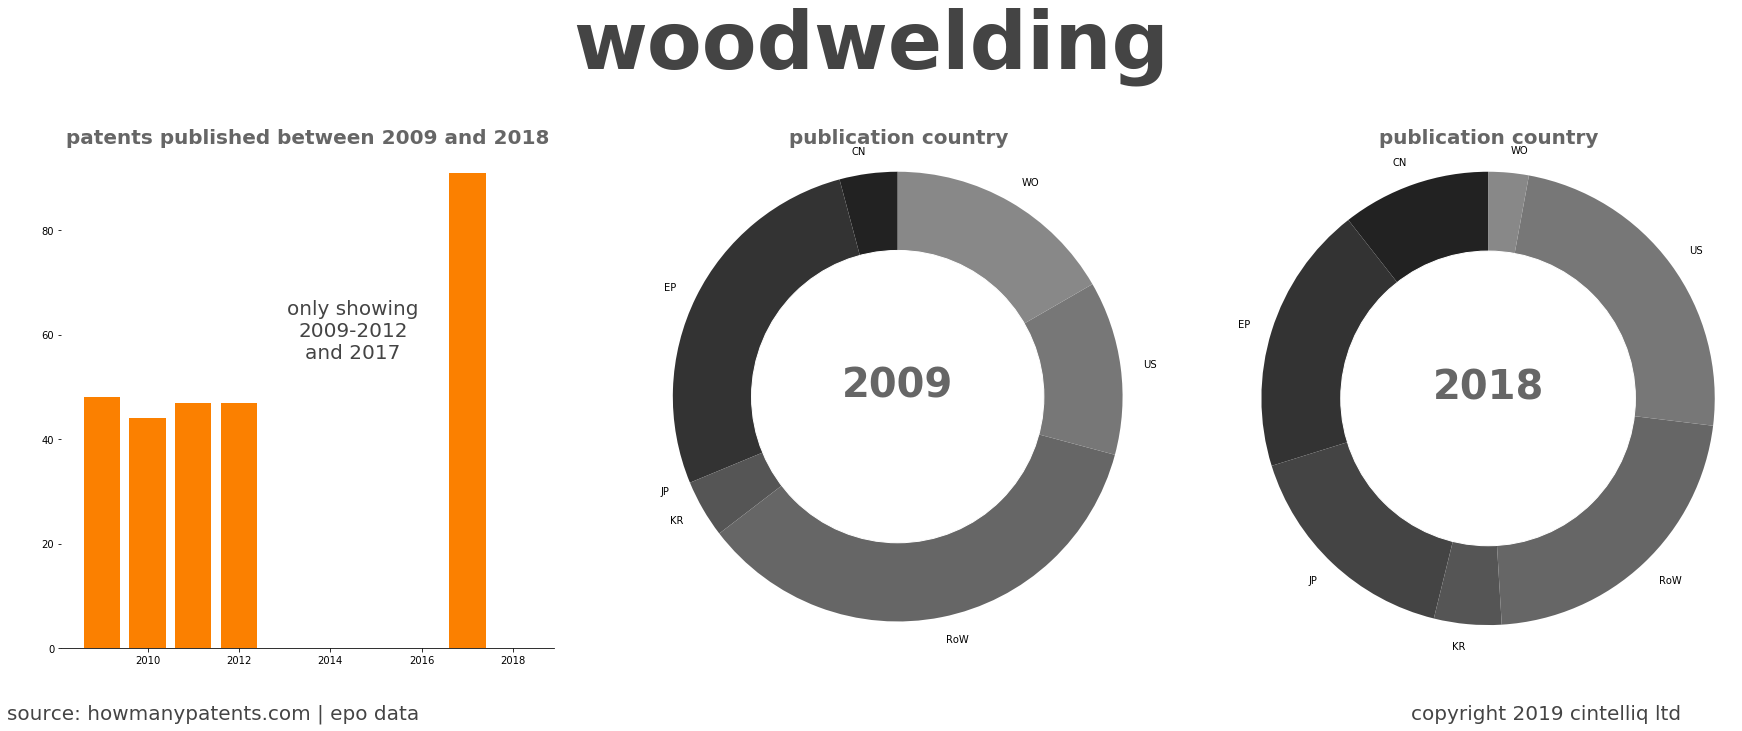 summary of patents for Woodwelding